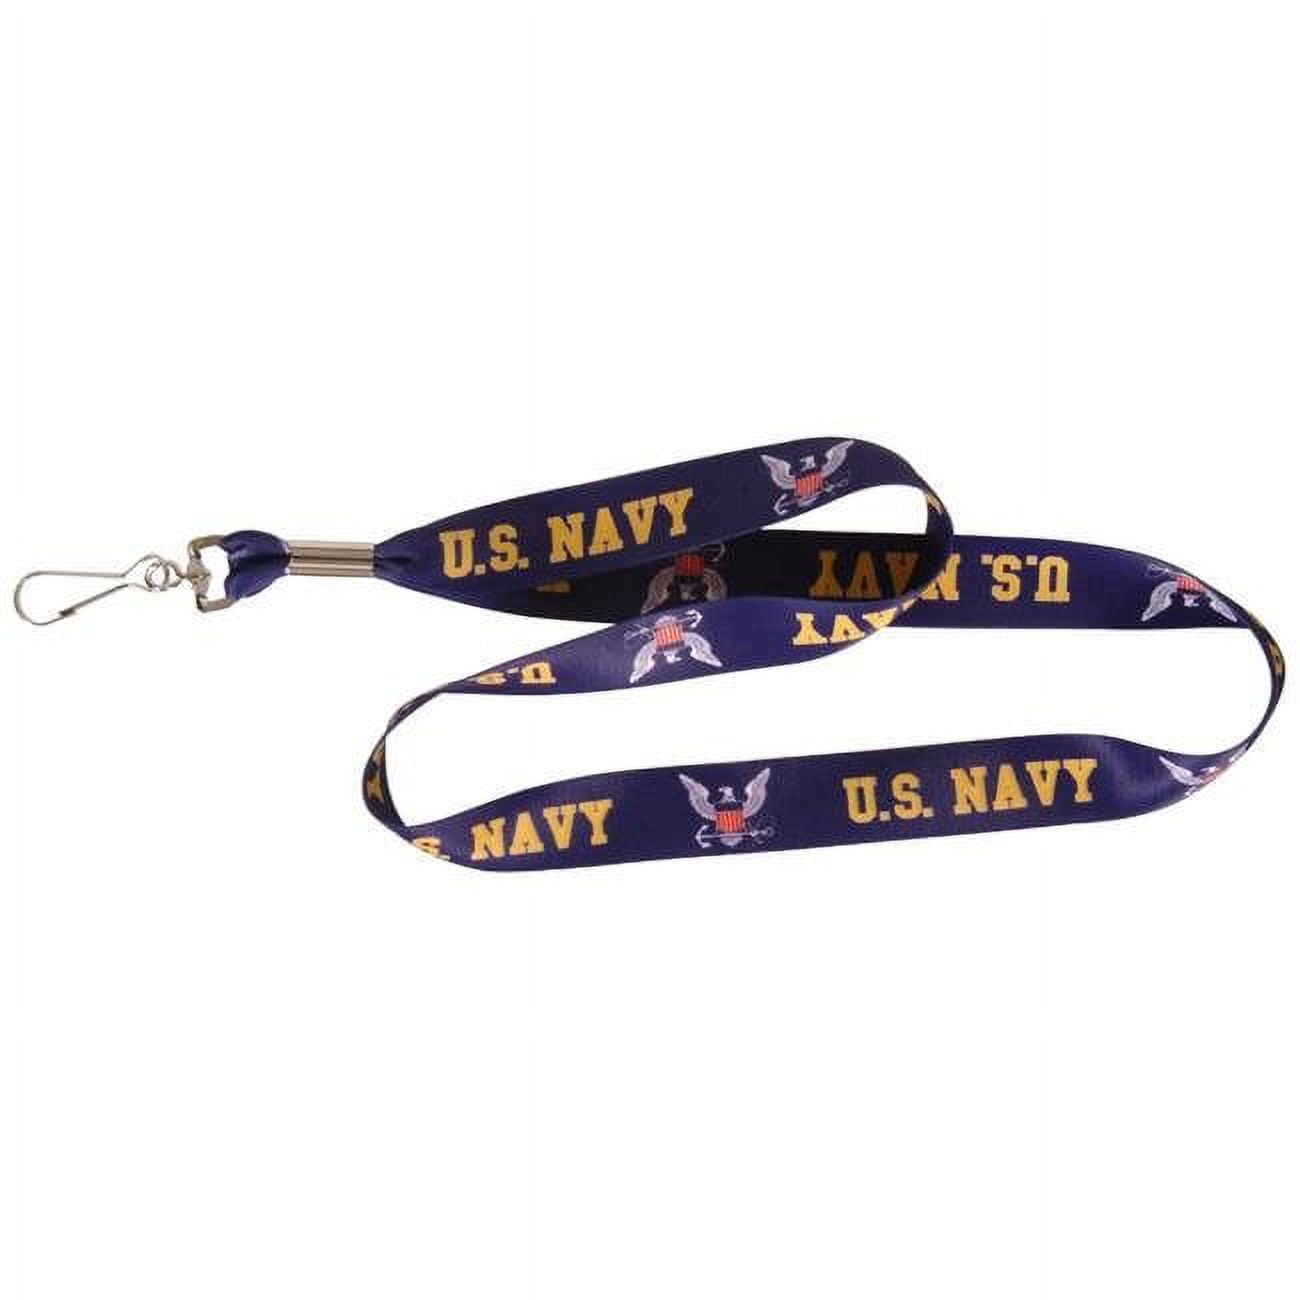 Picture of Hillman 5971197 Polyester Decorative Key Chain Lanyard, U.S. Navy - Pack of 6